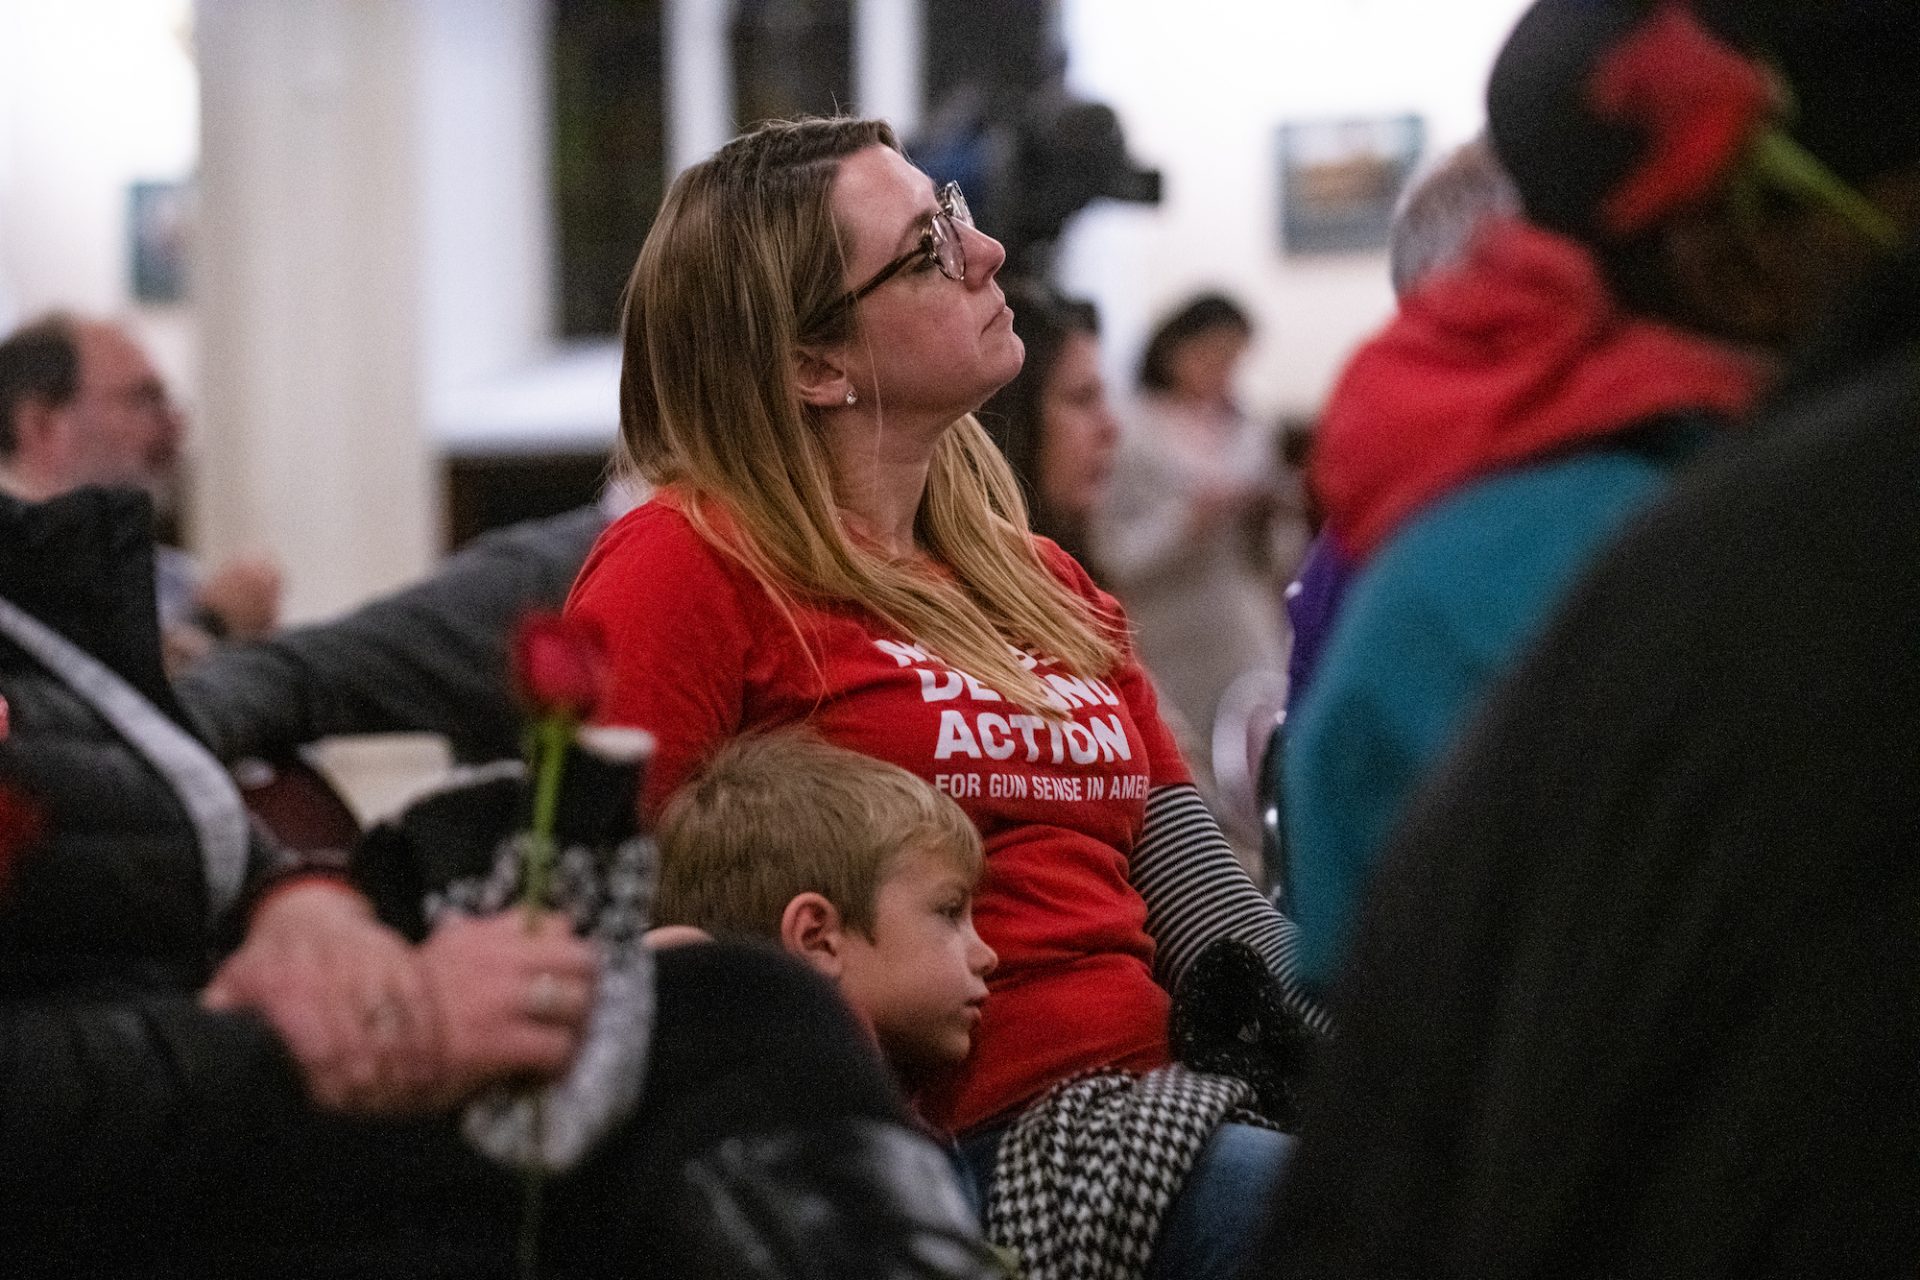 Joyce Pickles, a mother with Moms Demand Action, sits with her son Dominic, 6, during a vigil for gun violence victims at Broad Street Ministry on Wednesday, December 11, 2019.